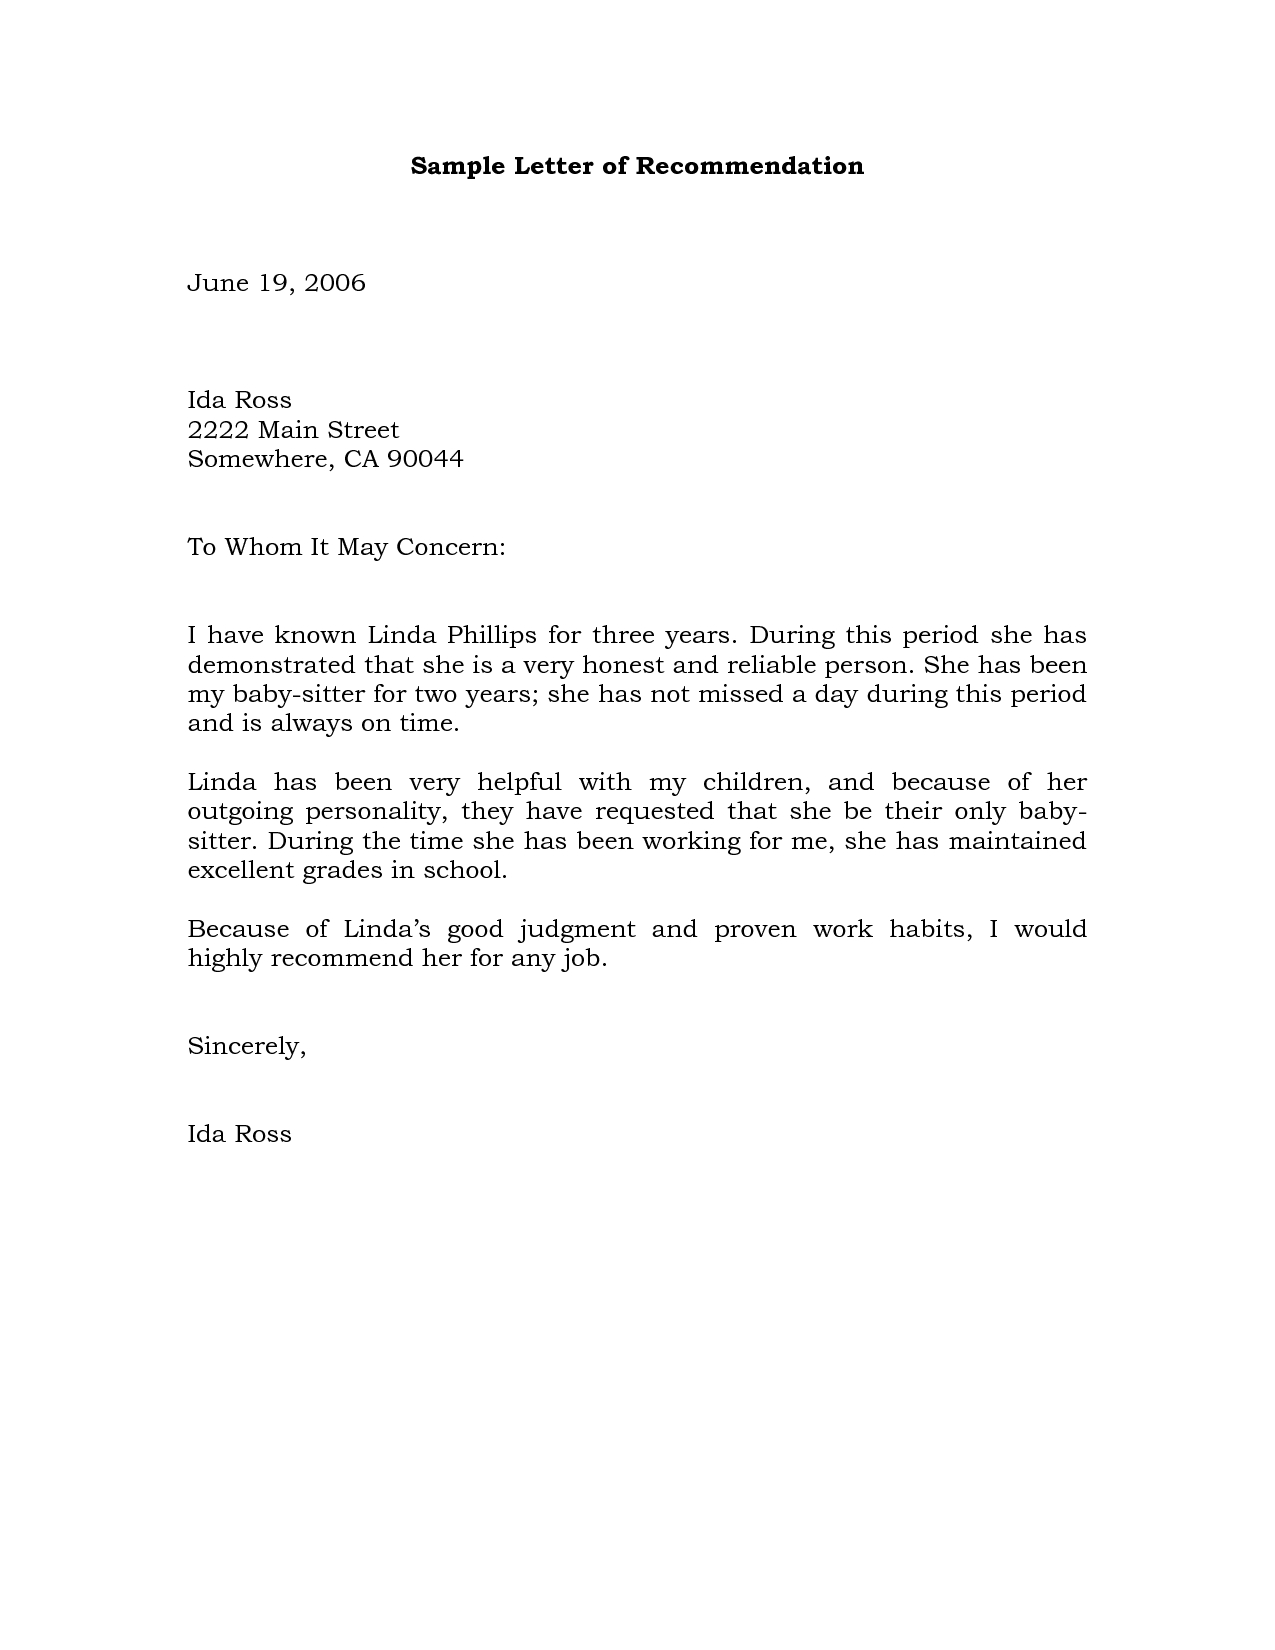 Sample Template for Letter Of Recommendation - Business Re Mendation Letter Template Acurnamedia